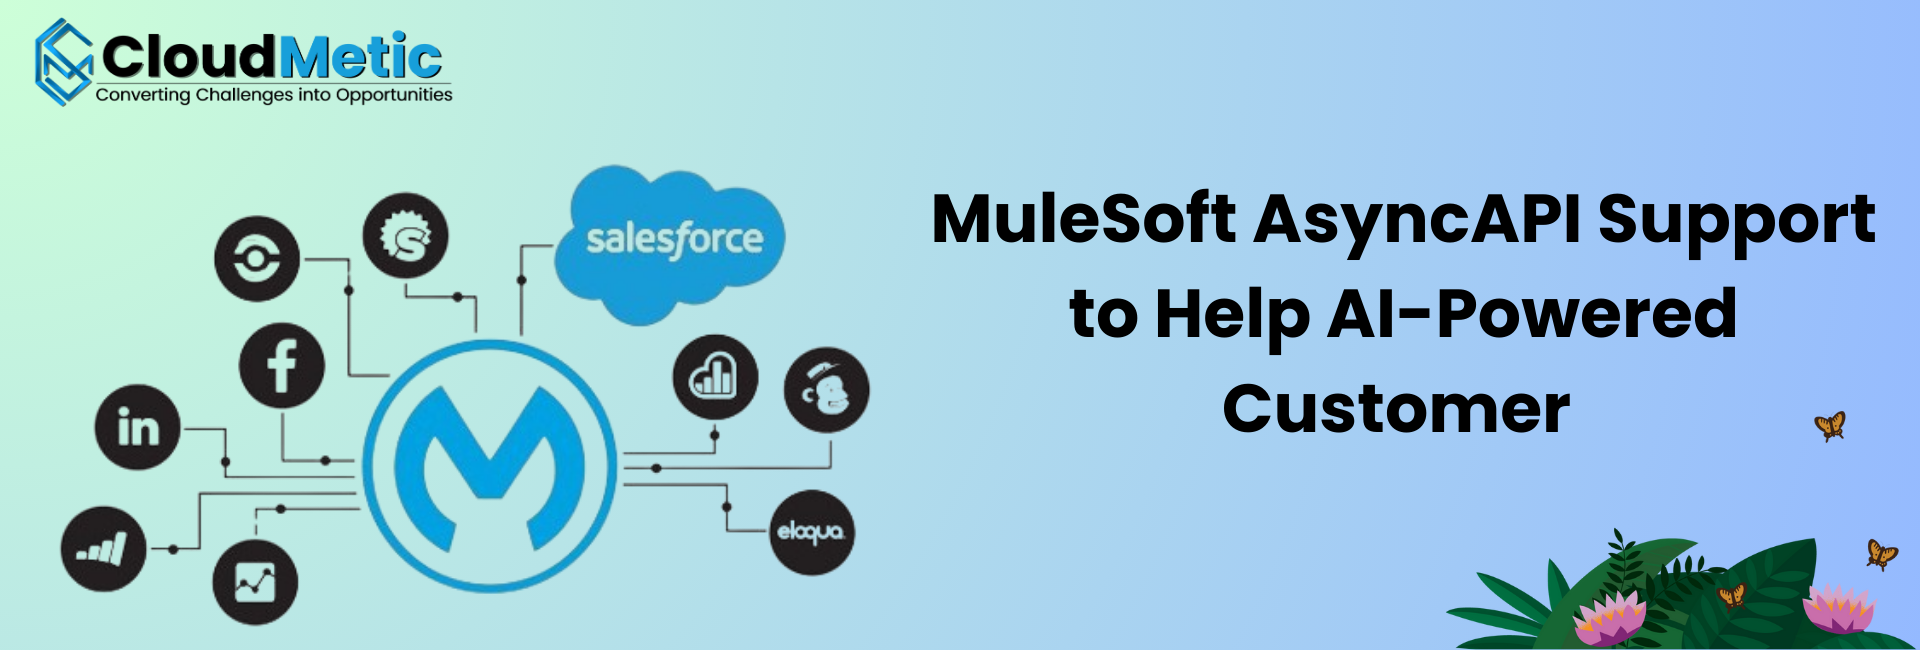 MuleSoft AsyncAPI Support to Help AI-Powered Customer